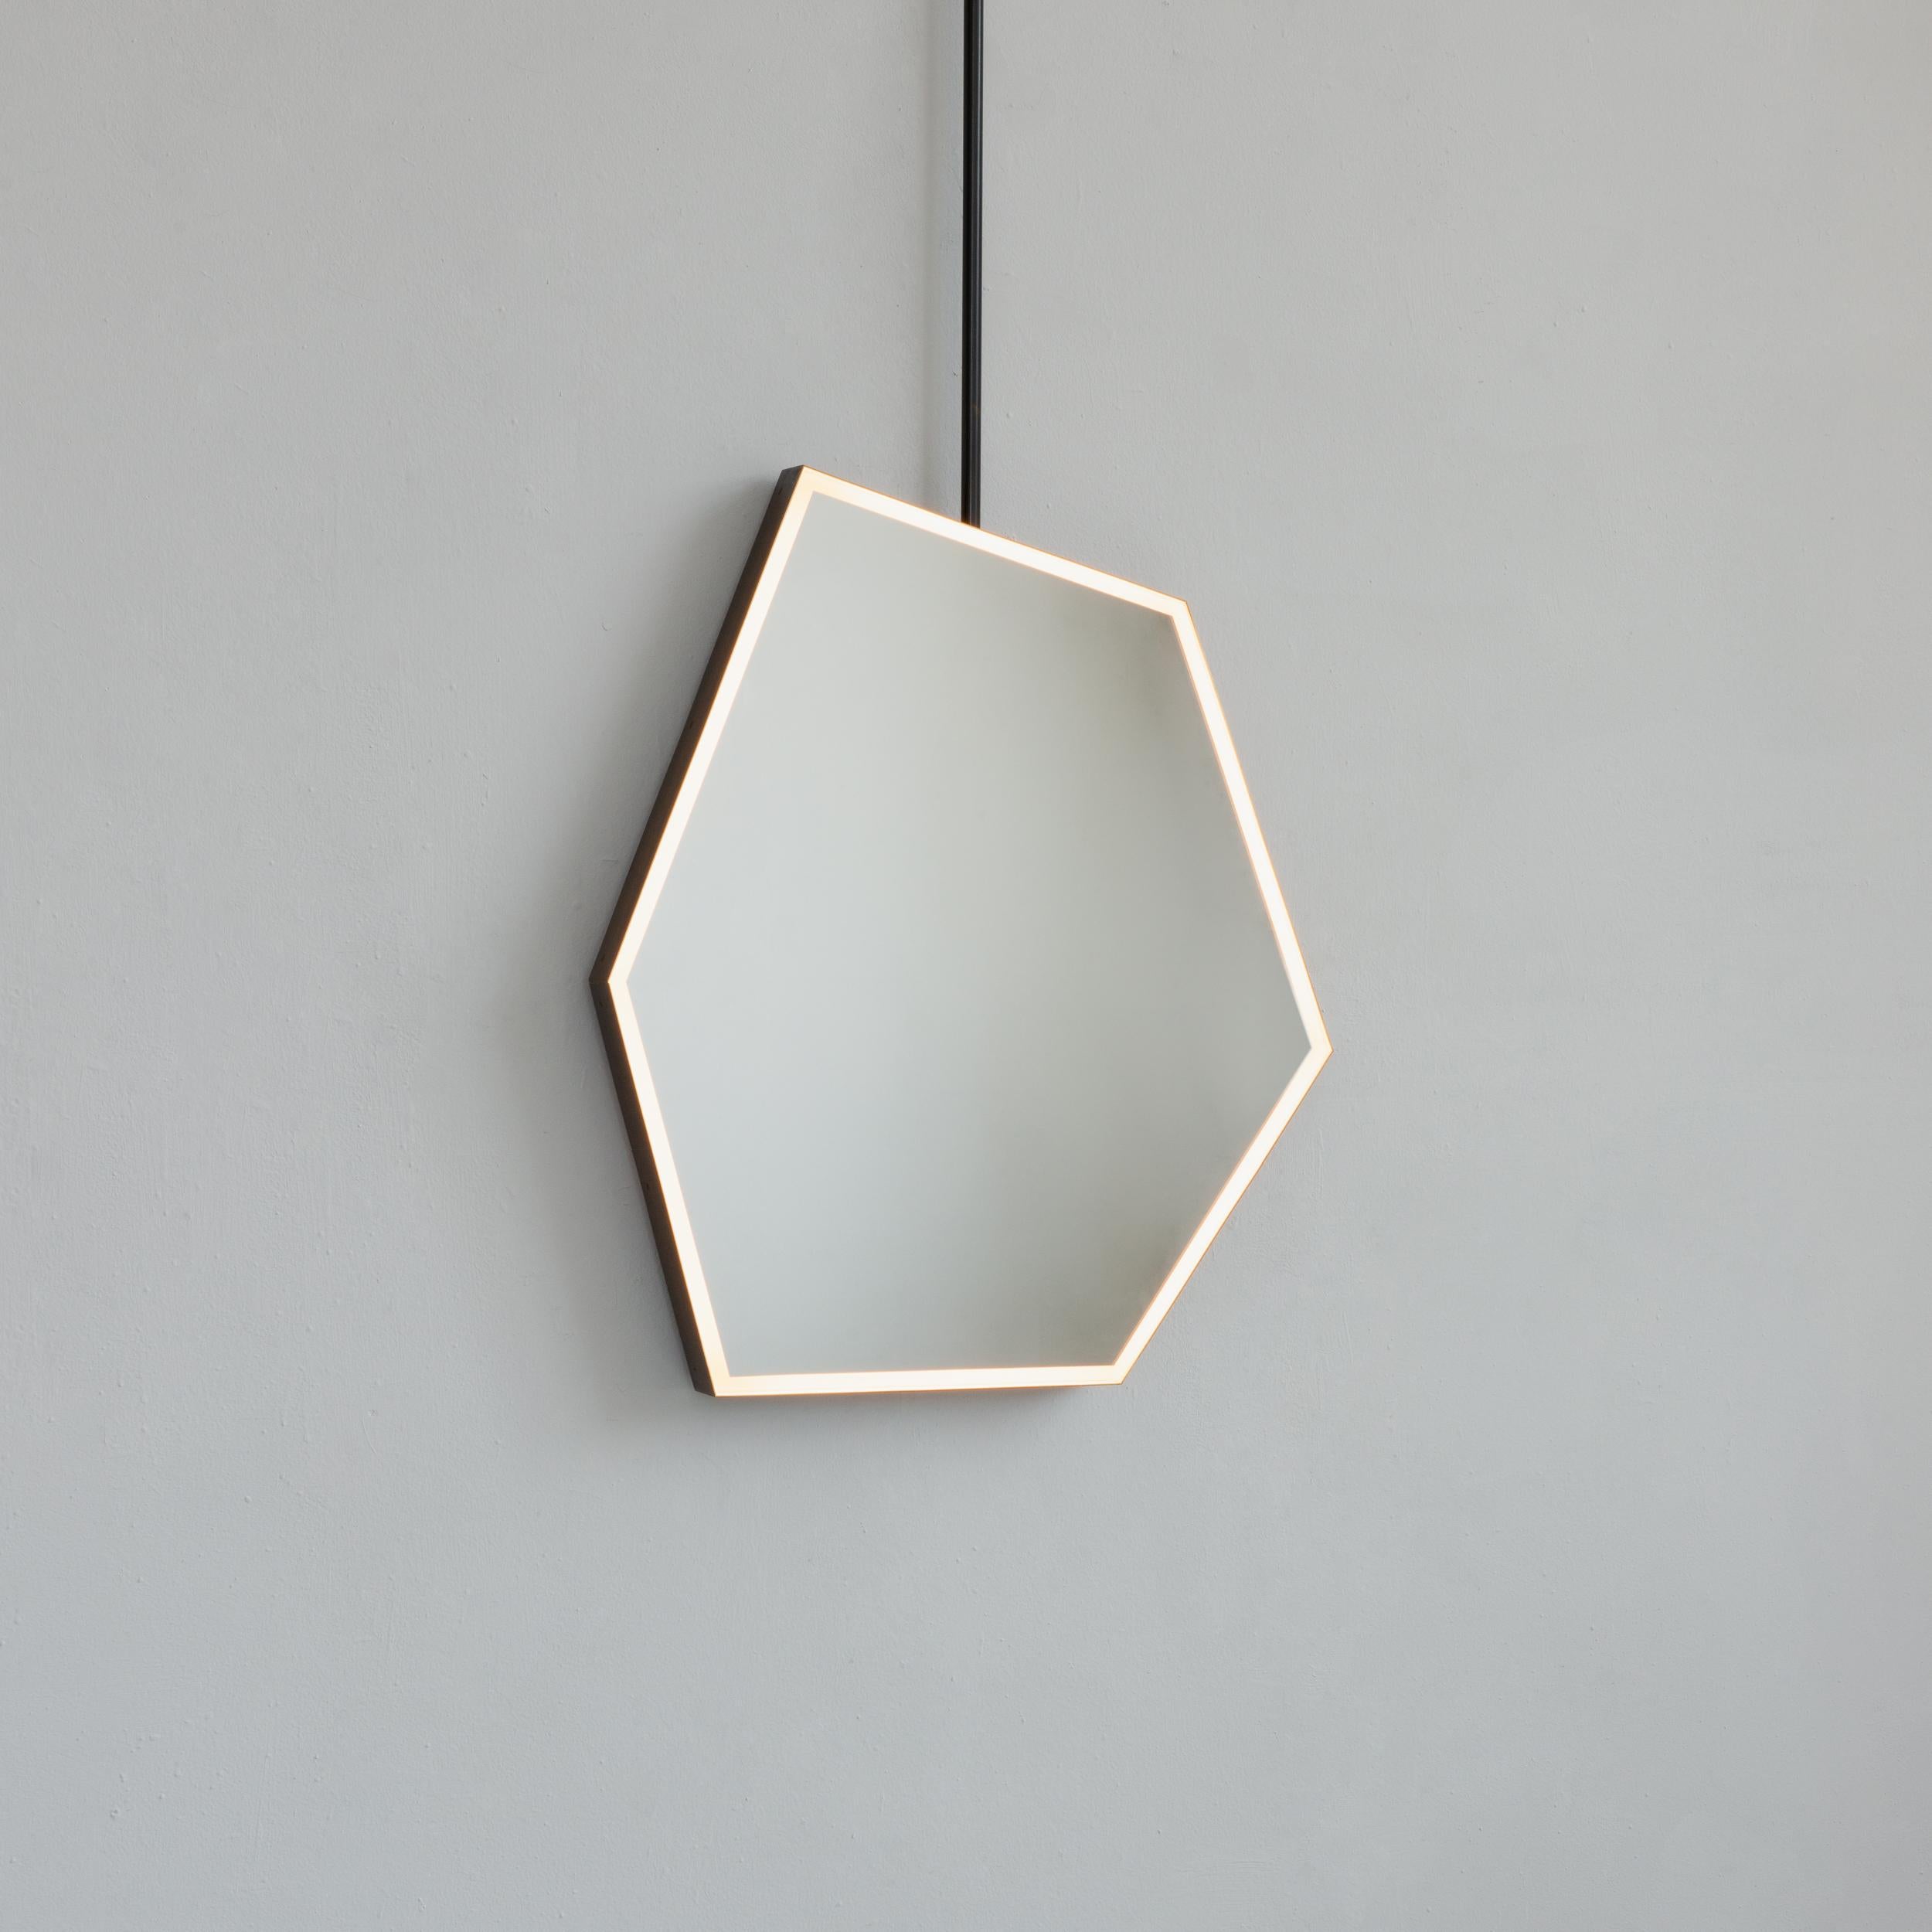 Modern and unique irregular hexagon suspended mirror with an exquisite and handcrafted brass frame with bronze patina finish. 

The mirror has an original and decorative front-illumination feature that has the potential to create a beautiful mood